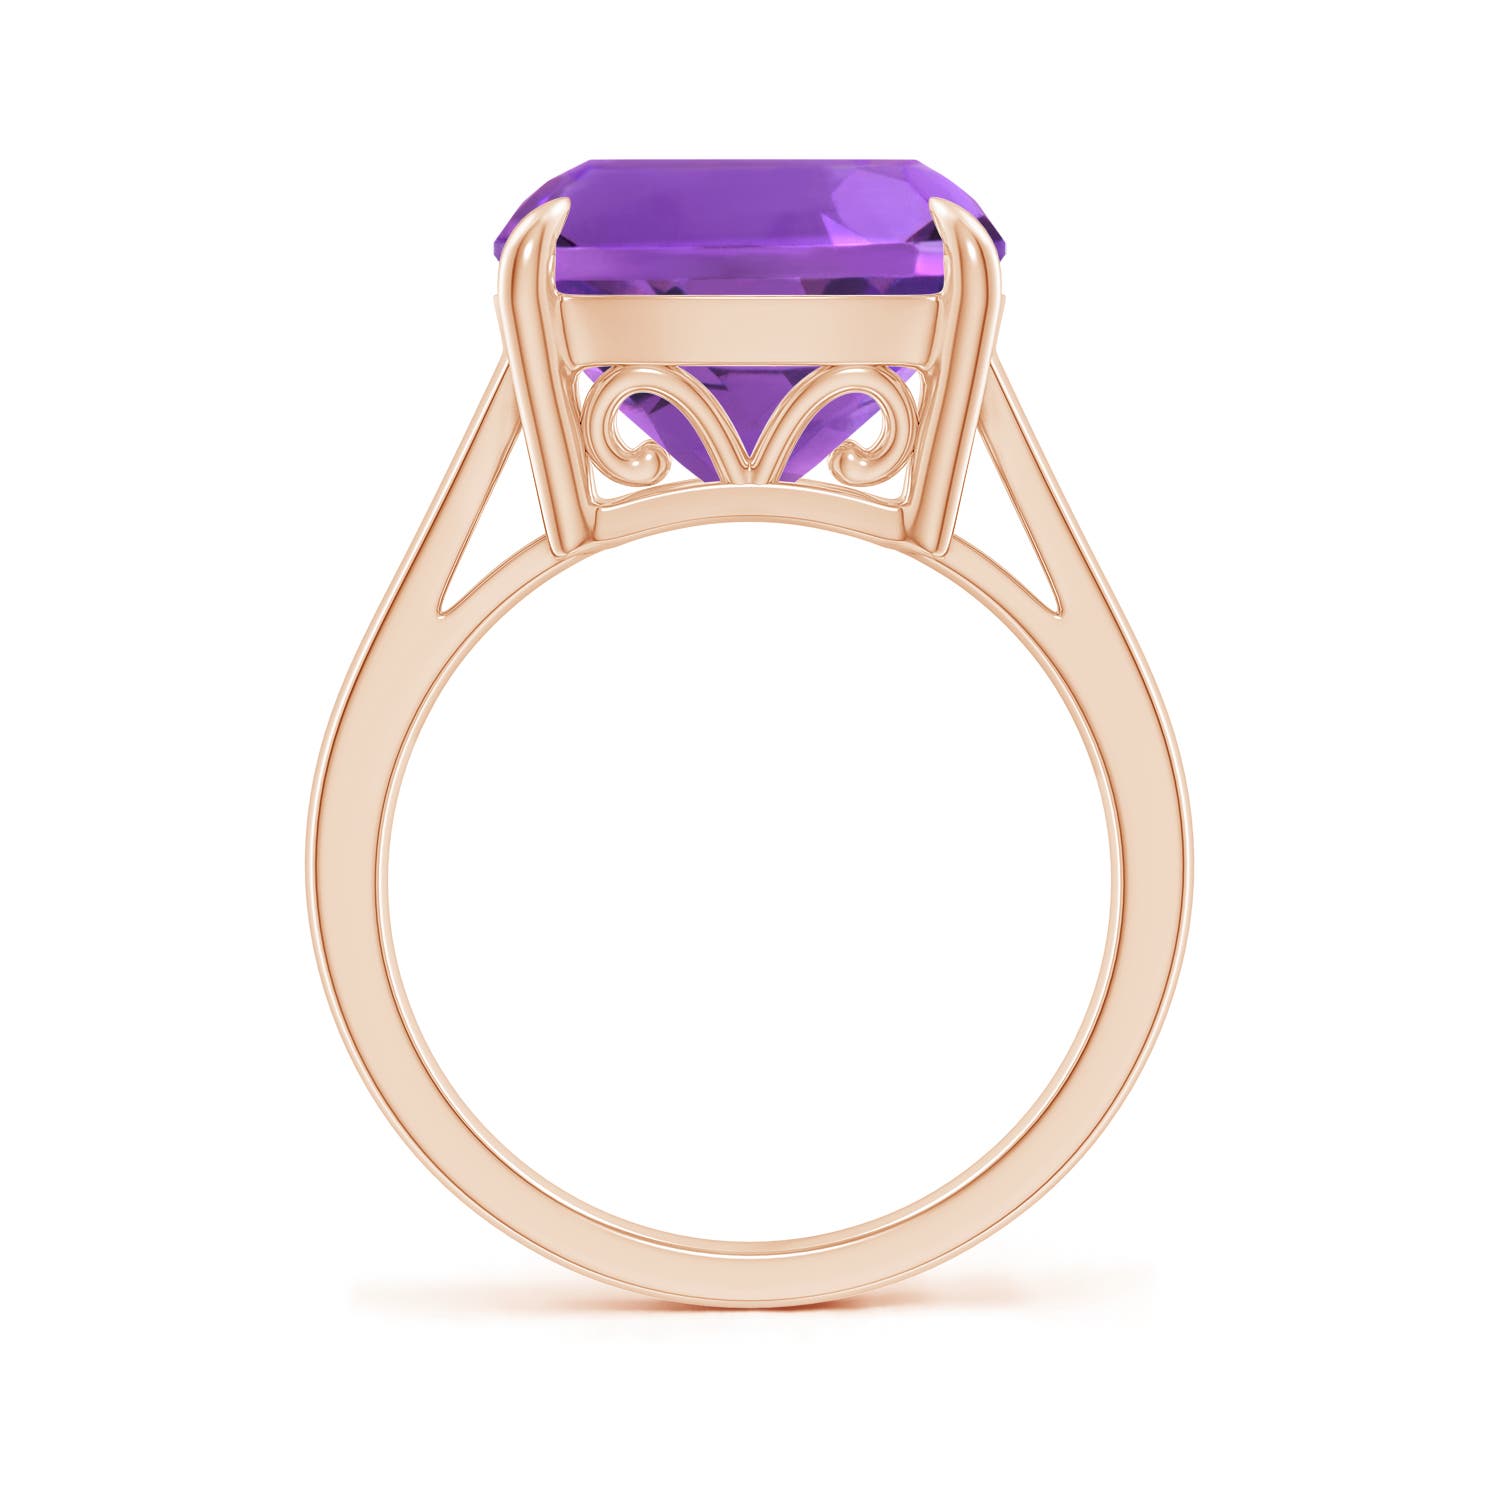 AAA - Amethyst / 6.15 CT / 14 KT Rose Gold